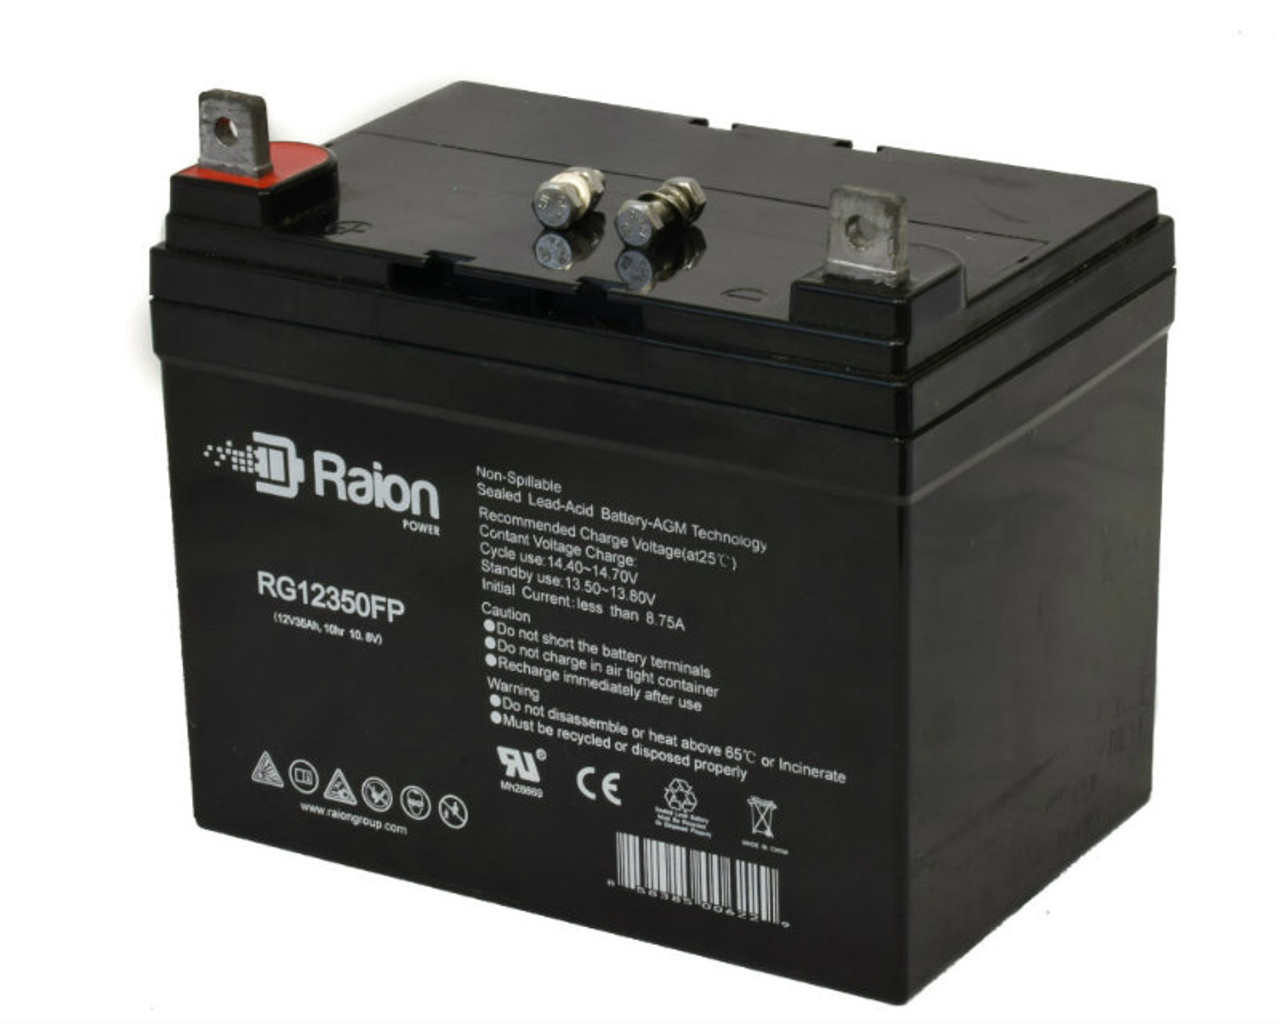 Raion Power Replacement 12V 35Ah RG12350FP Mobility Scooter Battery for Quickie Design Quickie 190